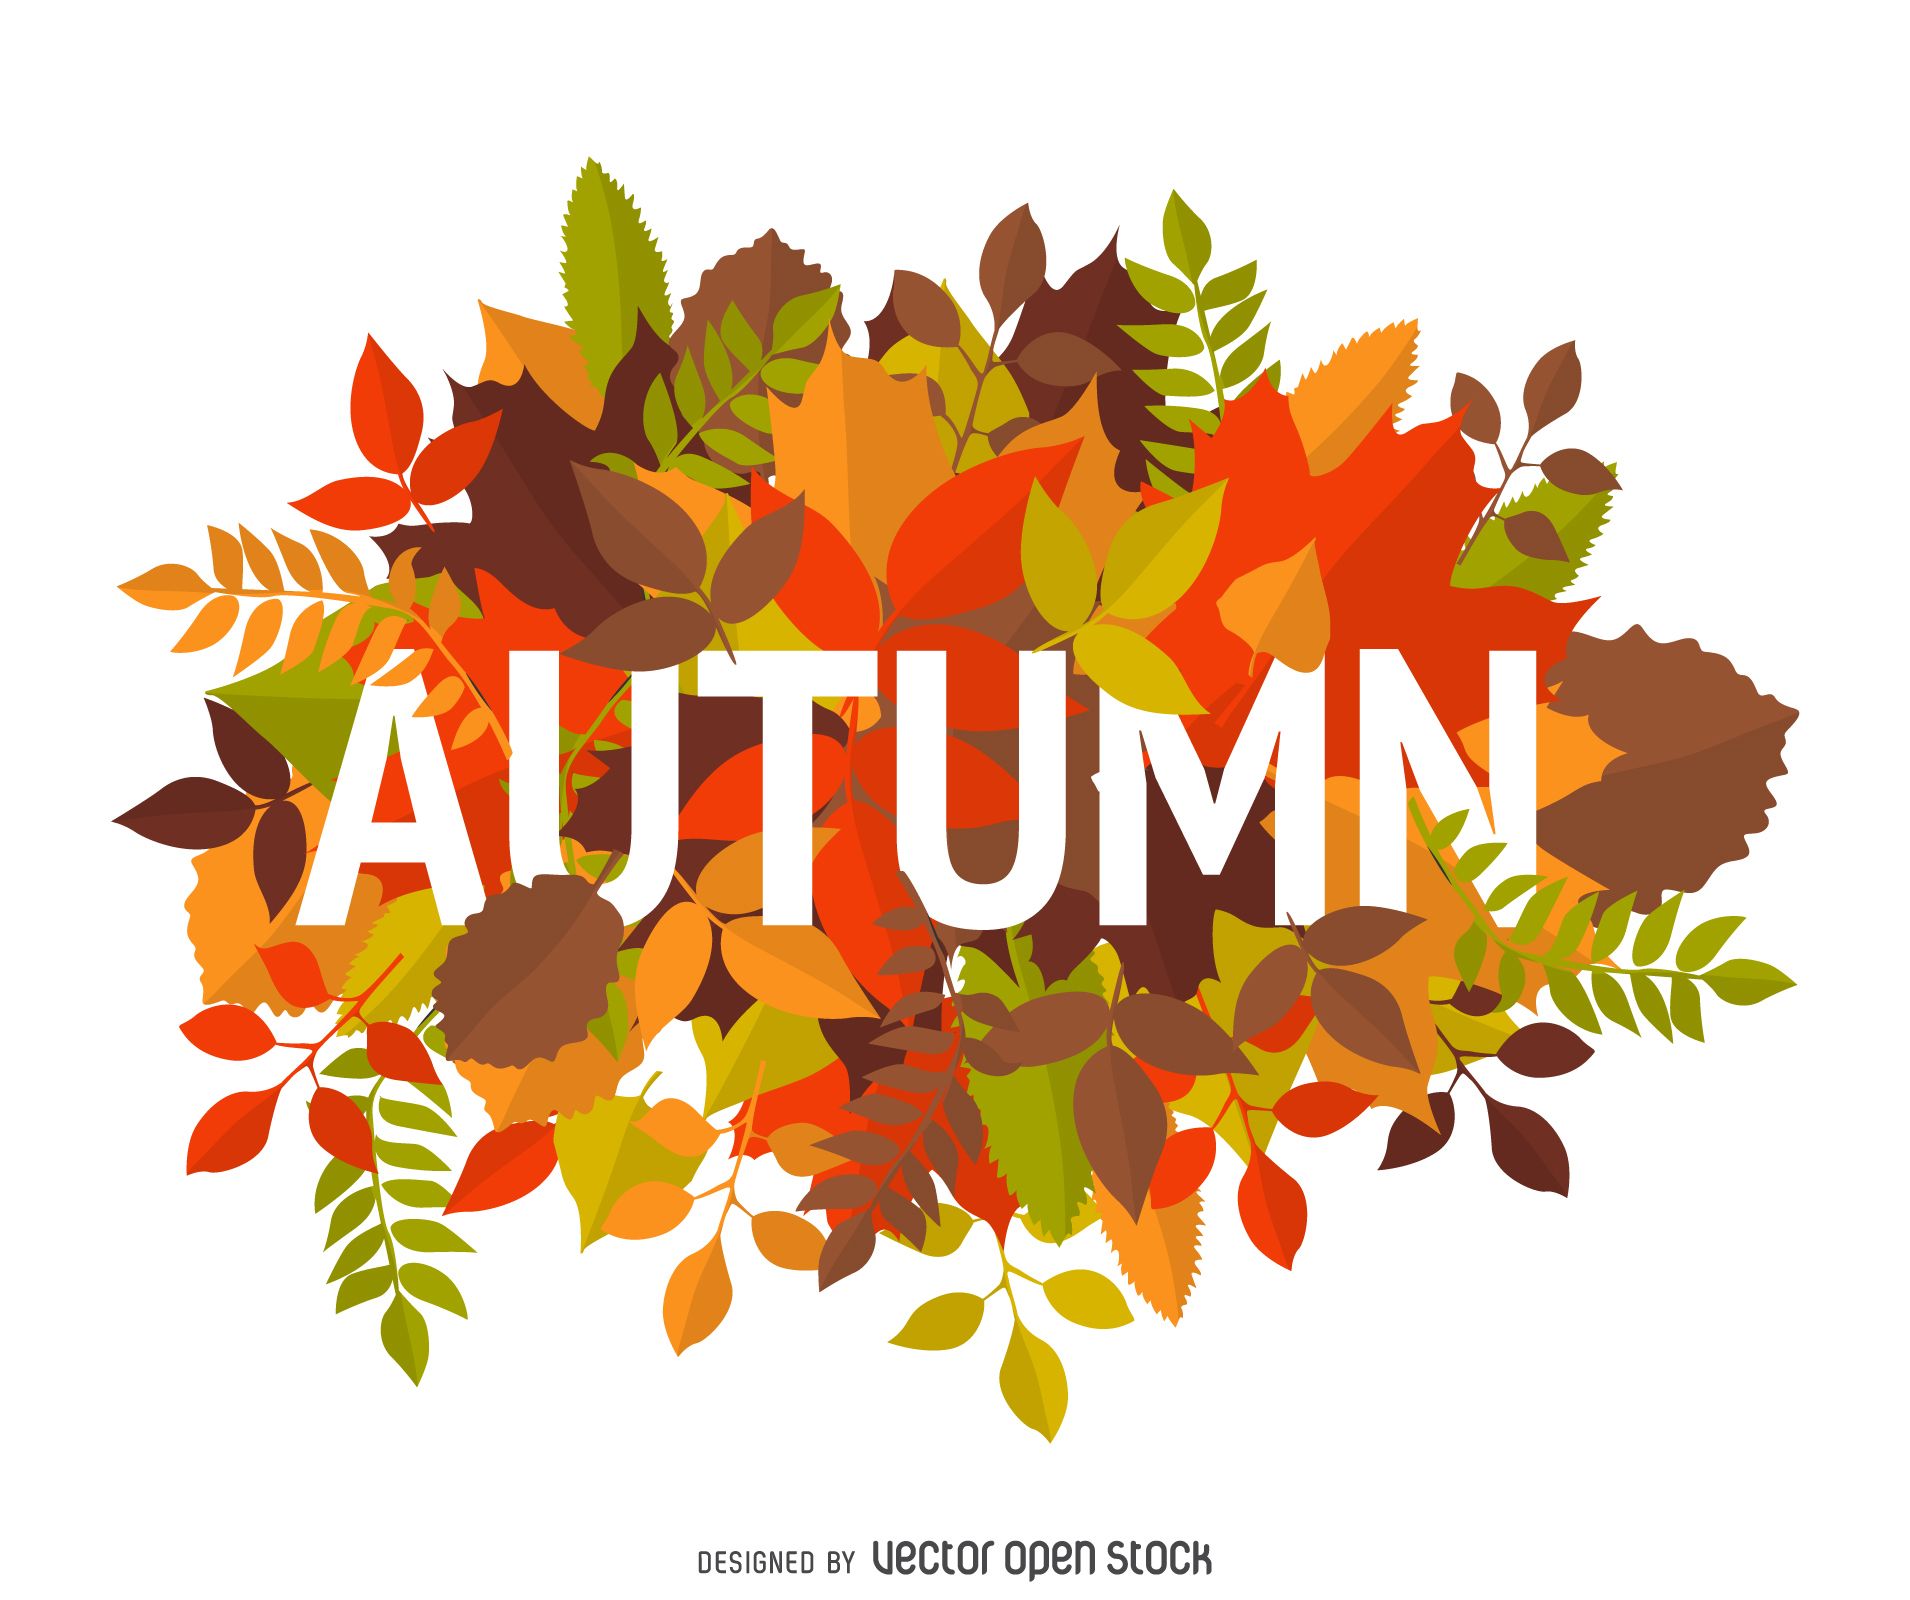 Autumn sign with leaves Vector. Autumn illustration, Fall signs, Fall design